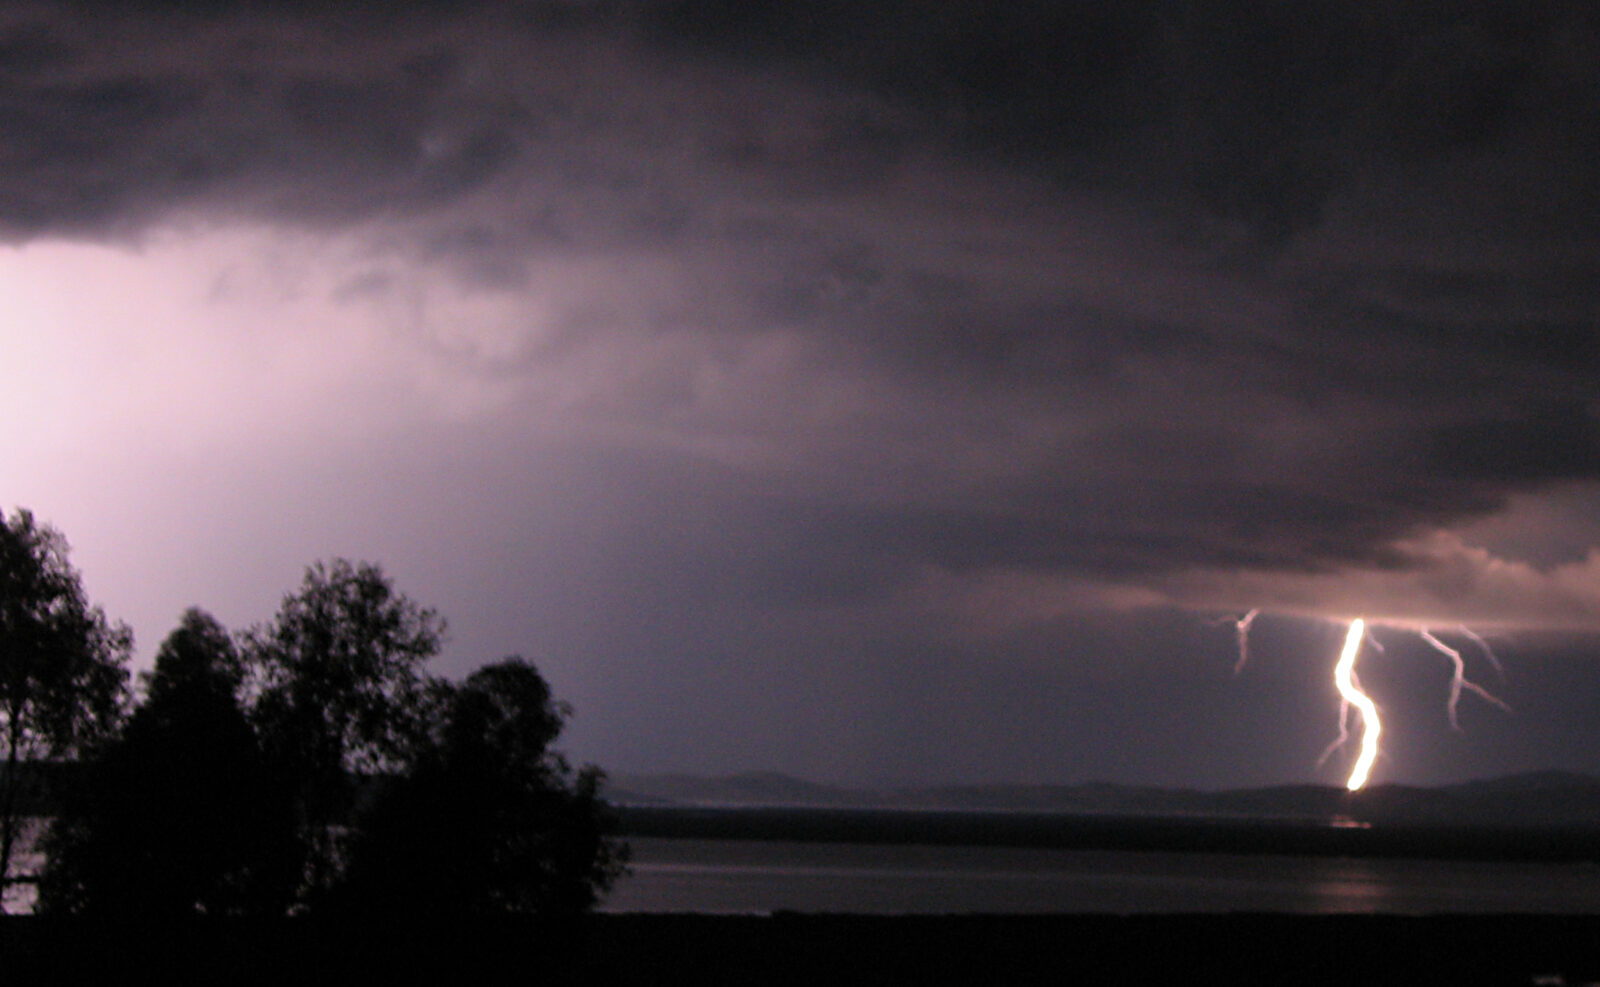 Thunder and Lightning over Lake titicaca